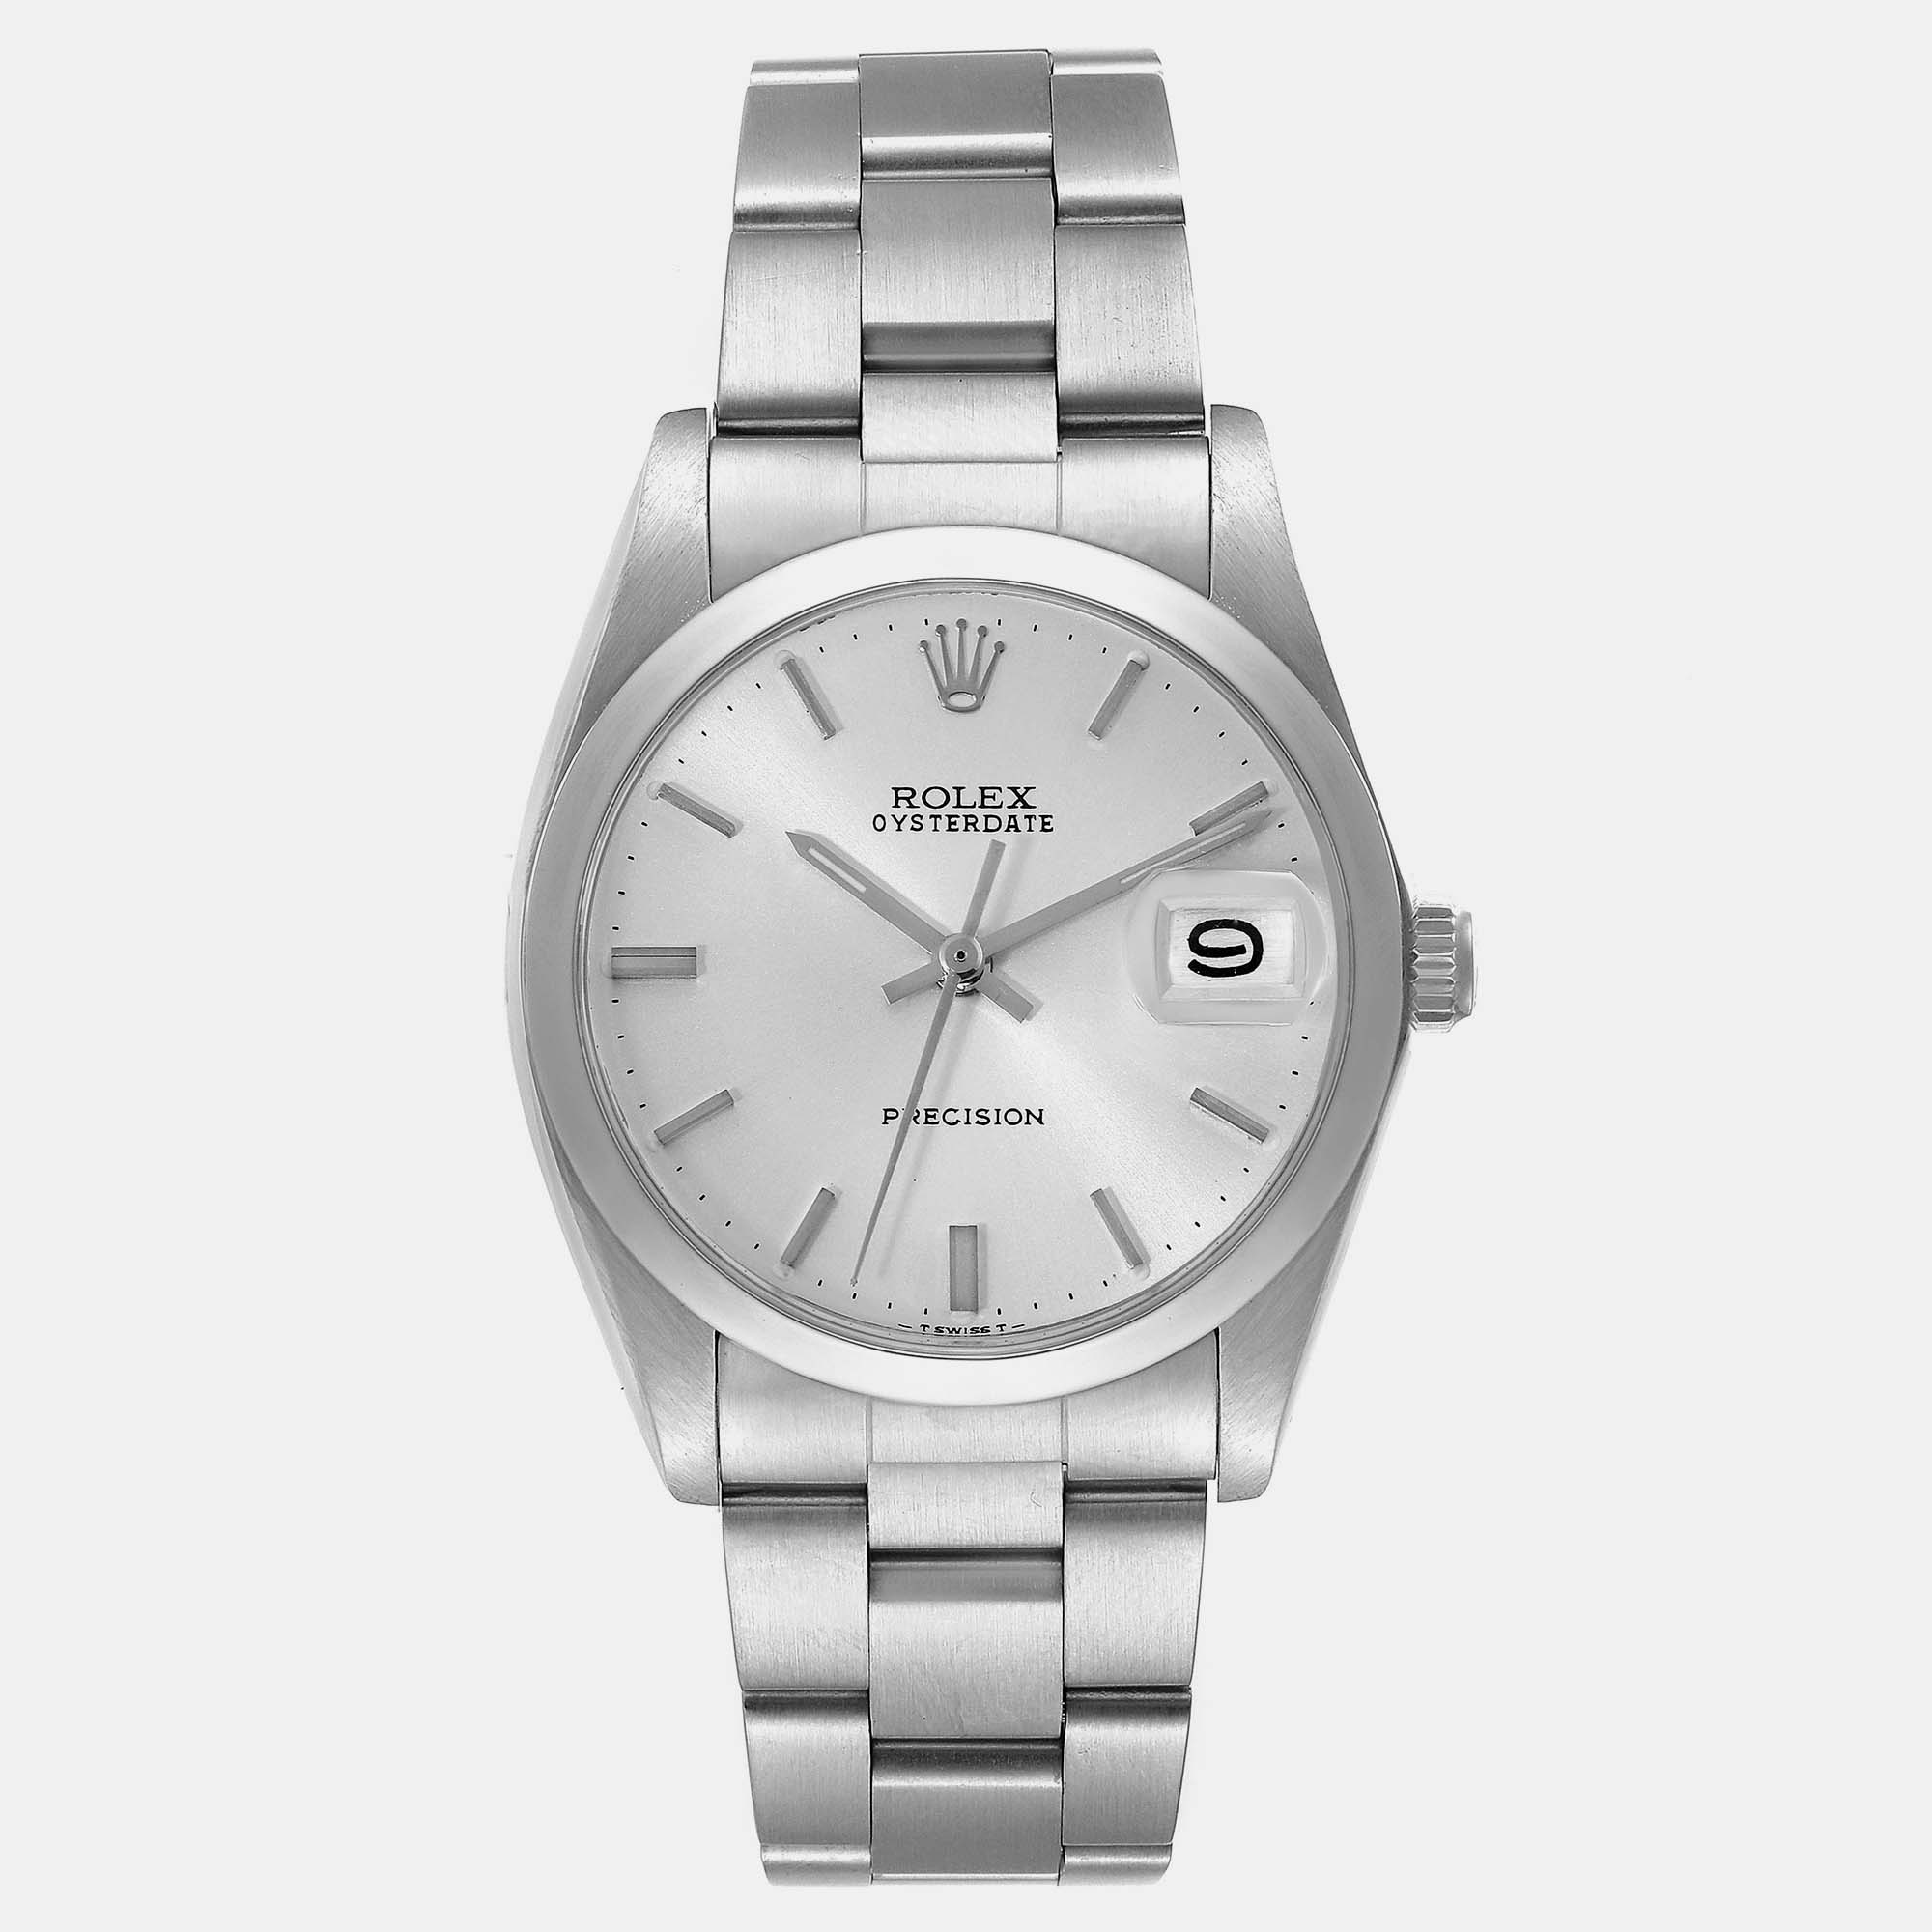 Rolex oyster date precision silver dial vintage steel men's watch 6694 35 mm